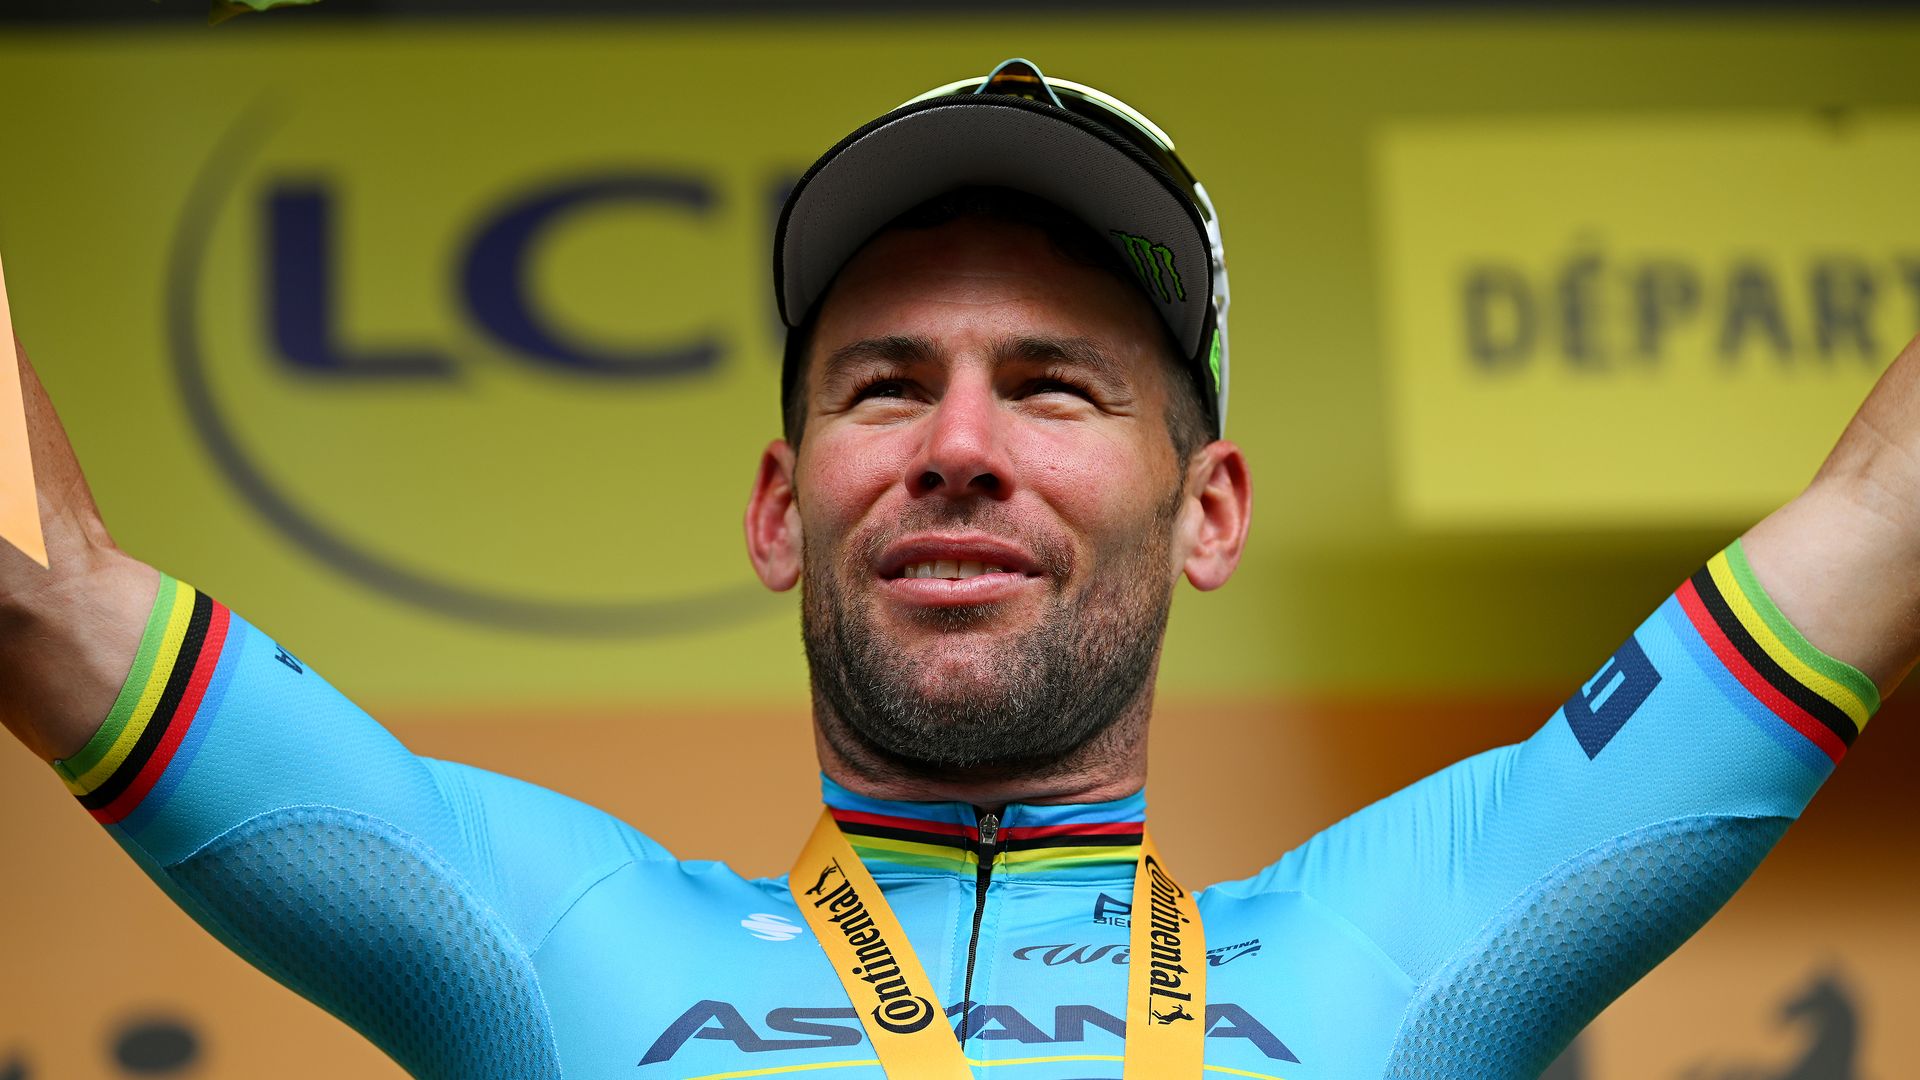 Mark Cavendish in a blue lycra outfit on a yellow podium